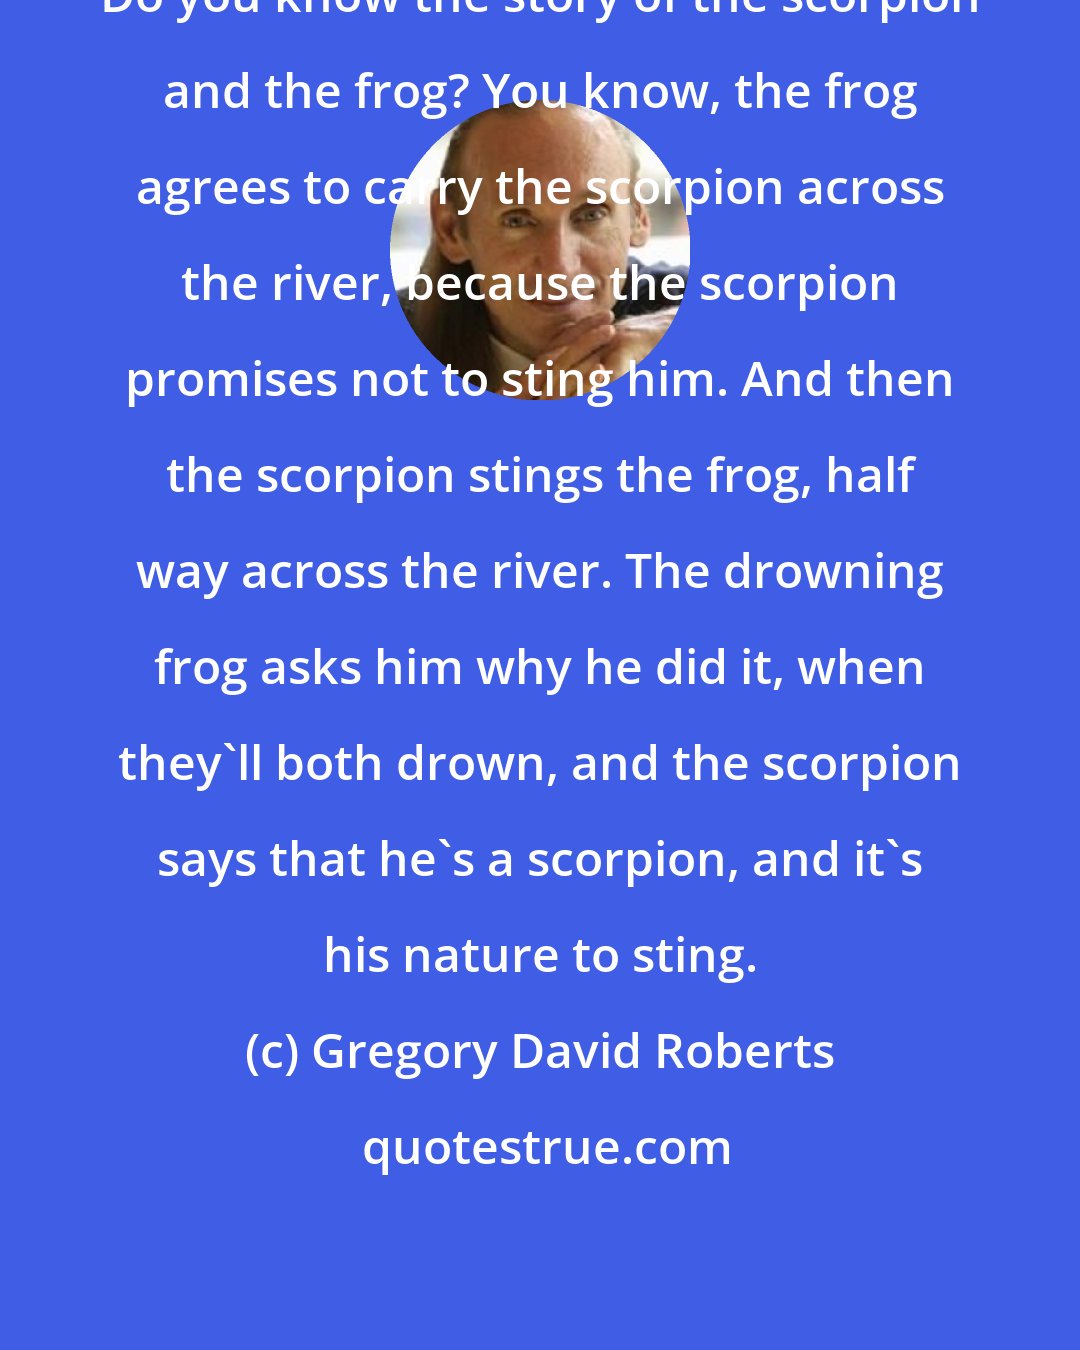 Gregory David Roberts: Do you know the story of the scorpion and the frog? You know, the frog agrees to carry the scorpion across the river, because the scorpion promises not to sting him. And then the scorpion stings the frog, half way across the river. The drowning frog asks him why he did it, when they'll both drown, and the scorpion says that he's a scorpion, and it's his nature to sting.